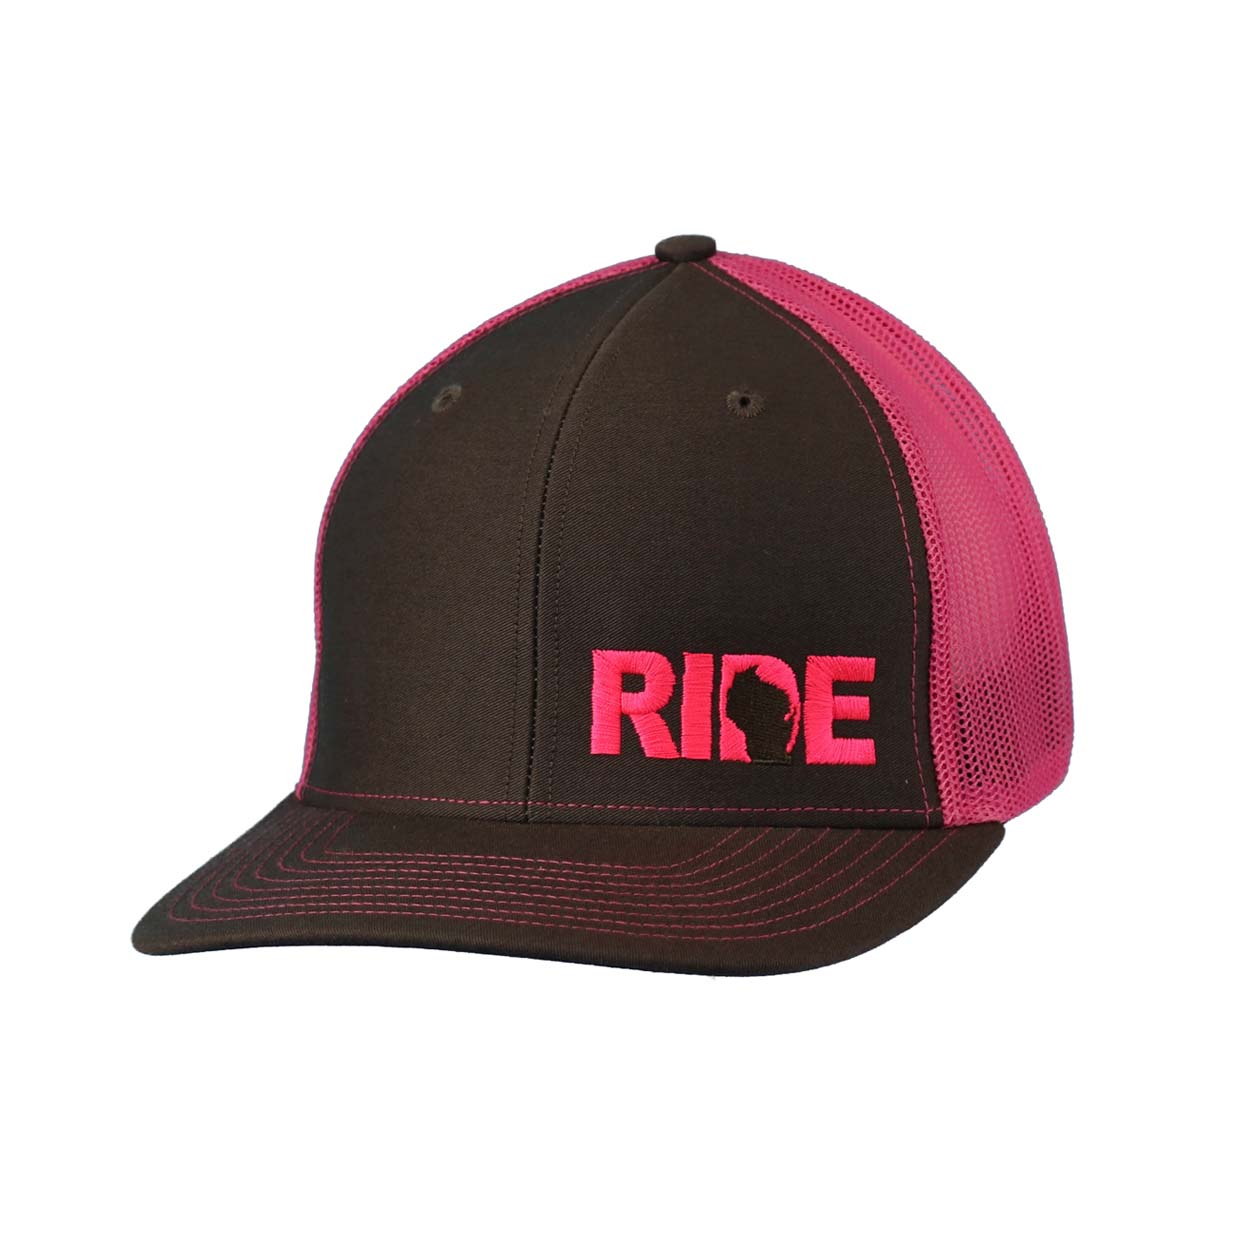 Ride Wisconsin Night Out Embroidered Snapback Trucker Hat Gray/Pink